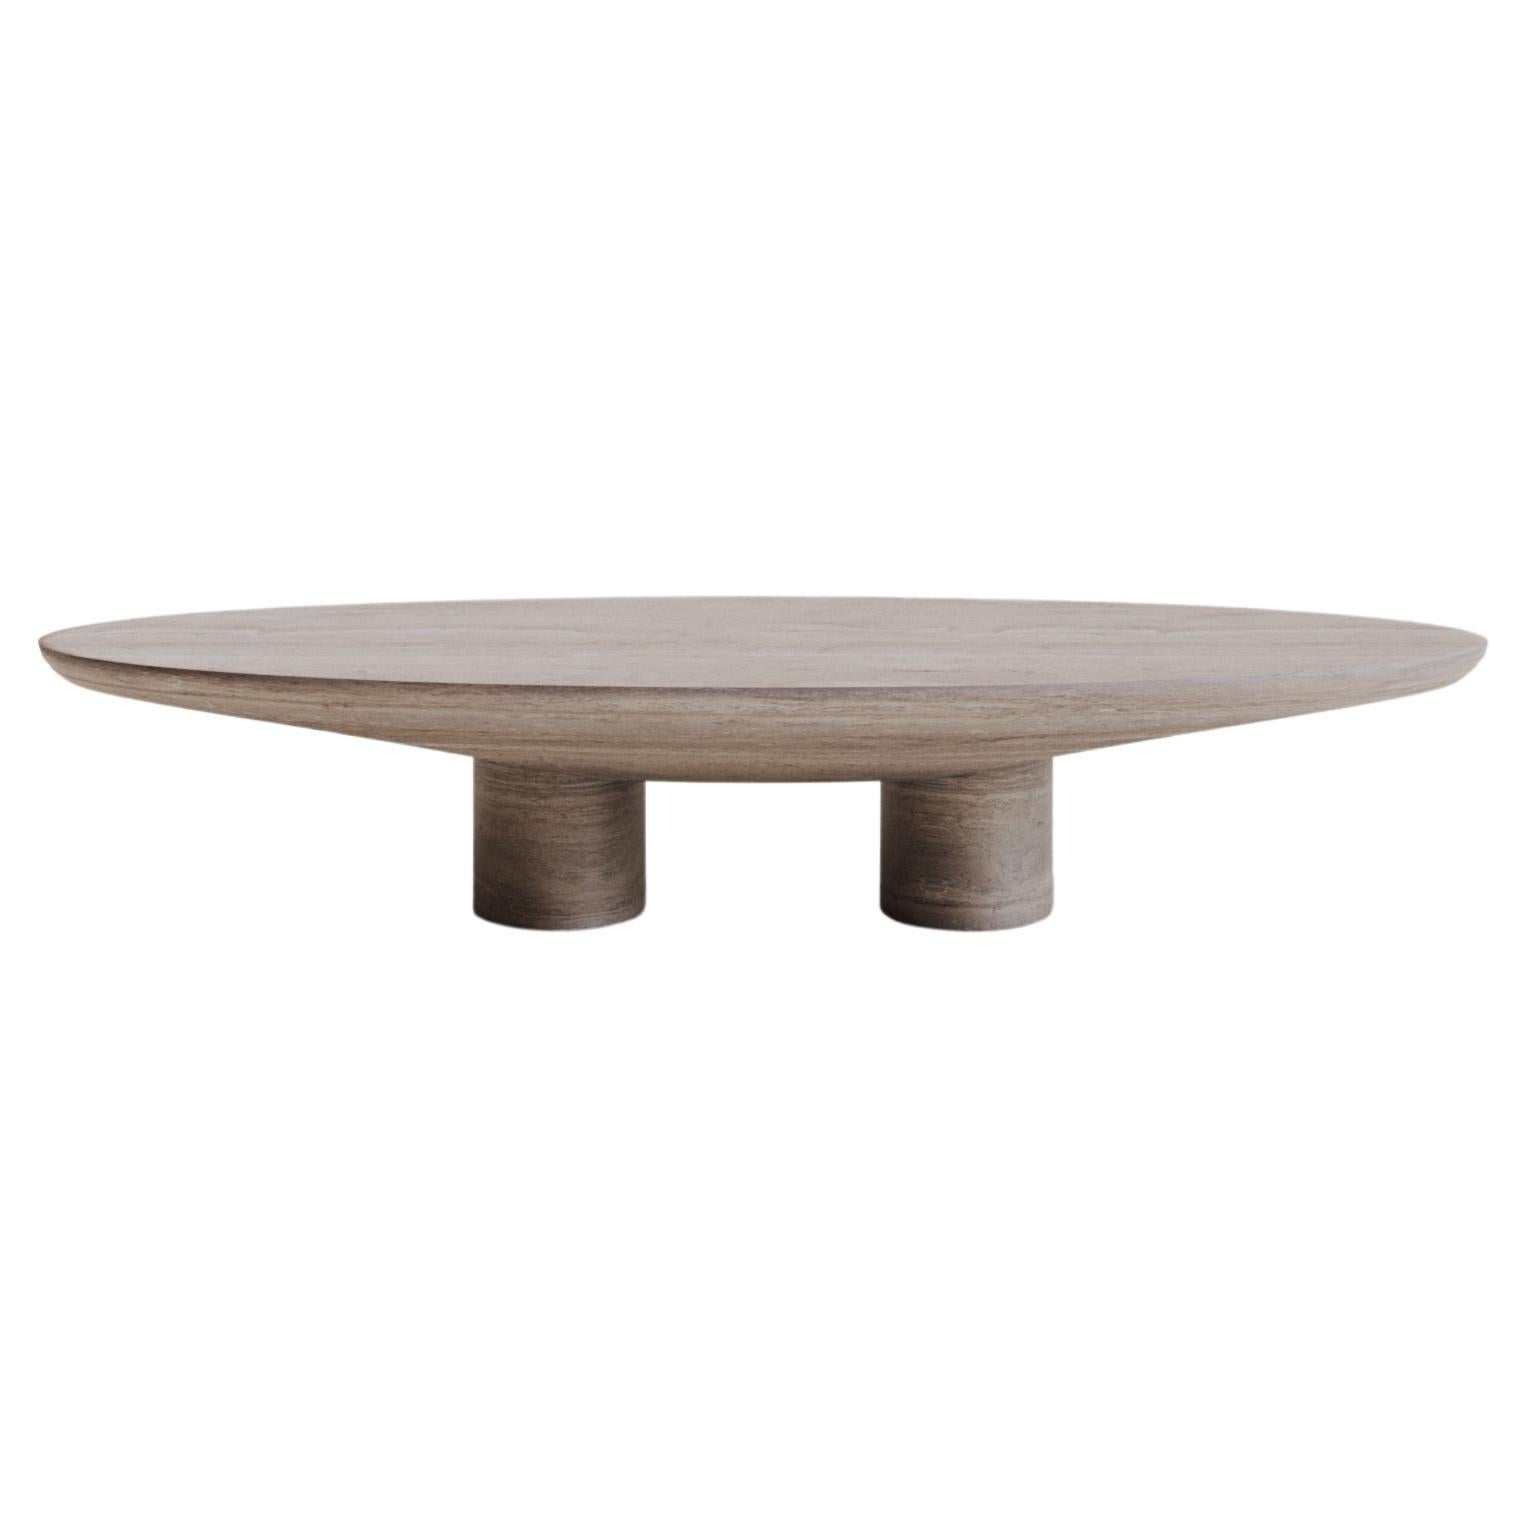 Solid Silver Travertine Oval Coffee Table 140 by Studio Narra